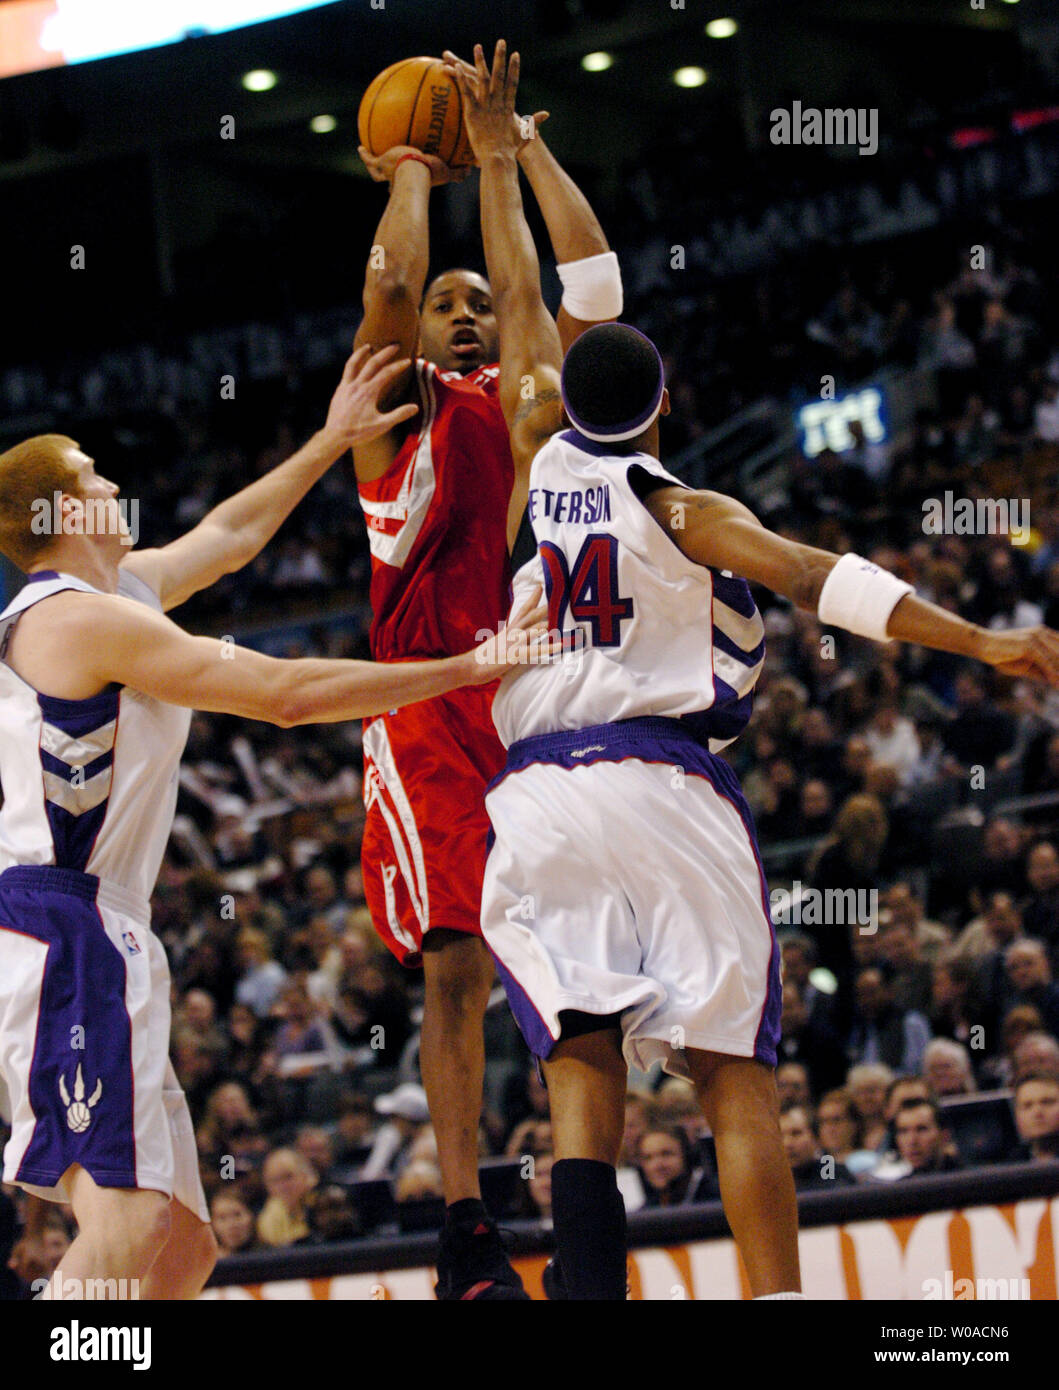 Houston Rockets' Tracy McGrady takes a shot at the basket despite being double-teamed by Toronto Raptors' Morris Peterson and Matt Bonner during first quarter action at the Air Canada Center on January 6, 2006 in Toronto, Canada. McGrady led all scorers with 37 points on the night but the Raptors defeated the Rockets 112-92. (UPI Photo/Christine Chew) Stock Photo